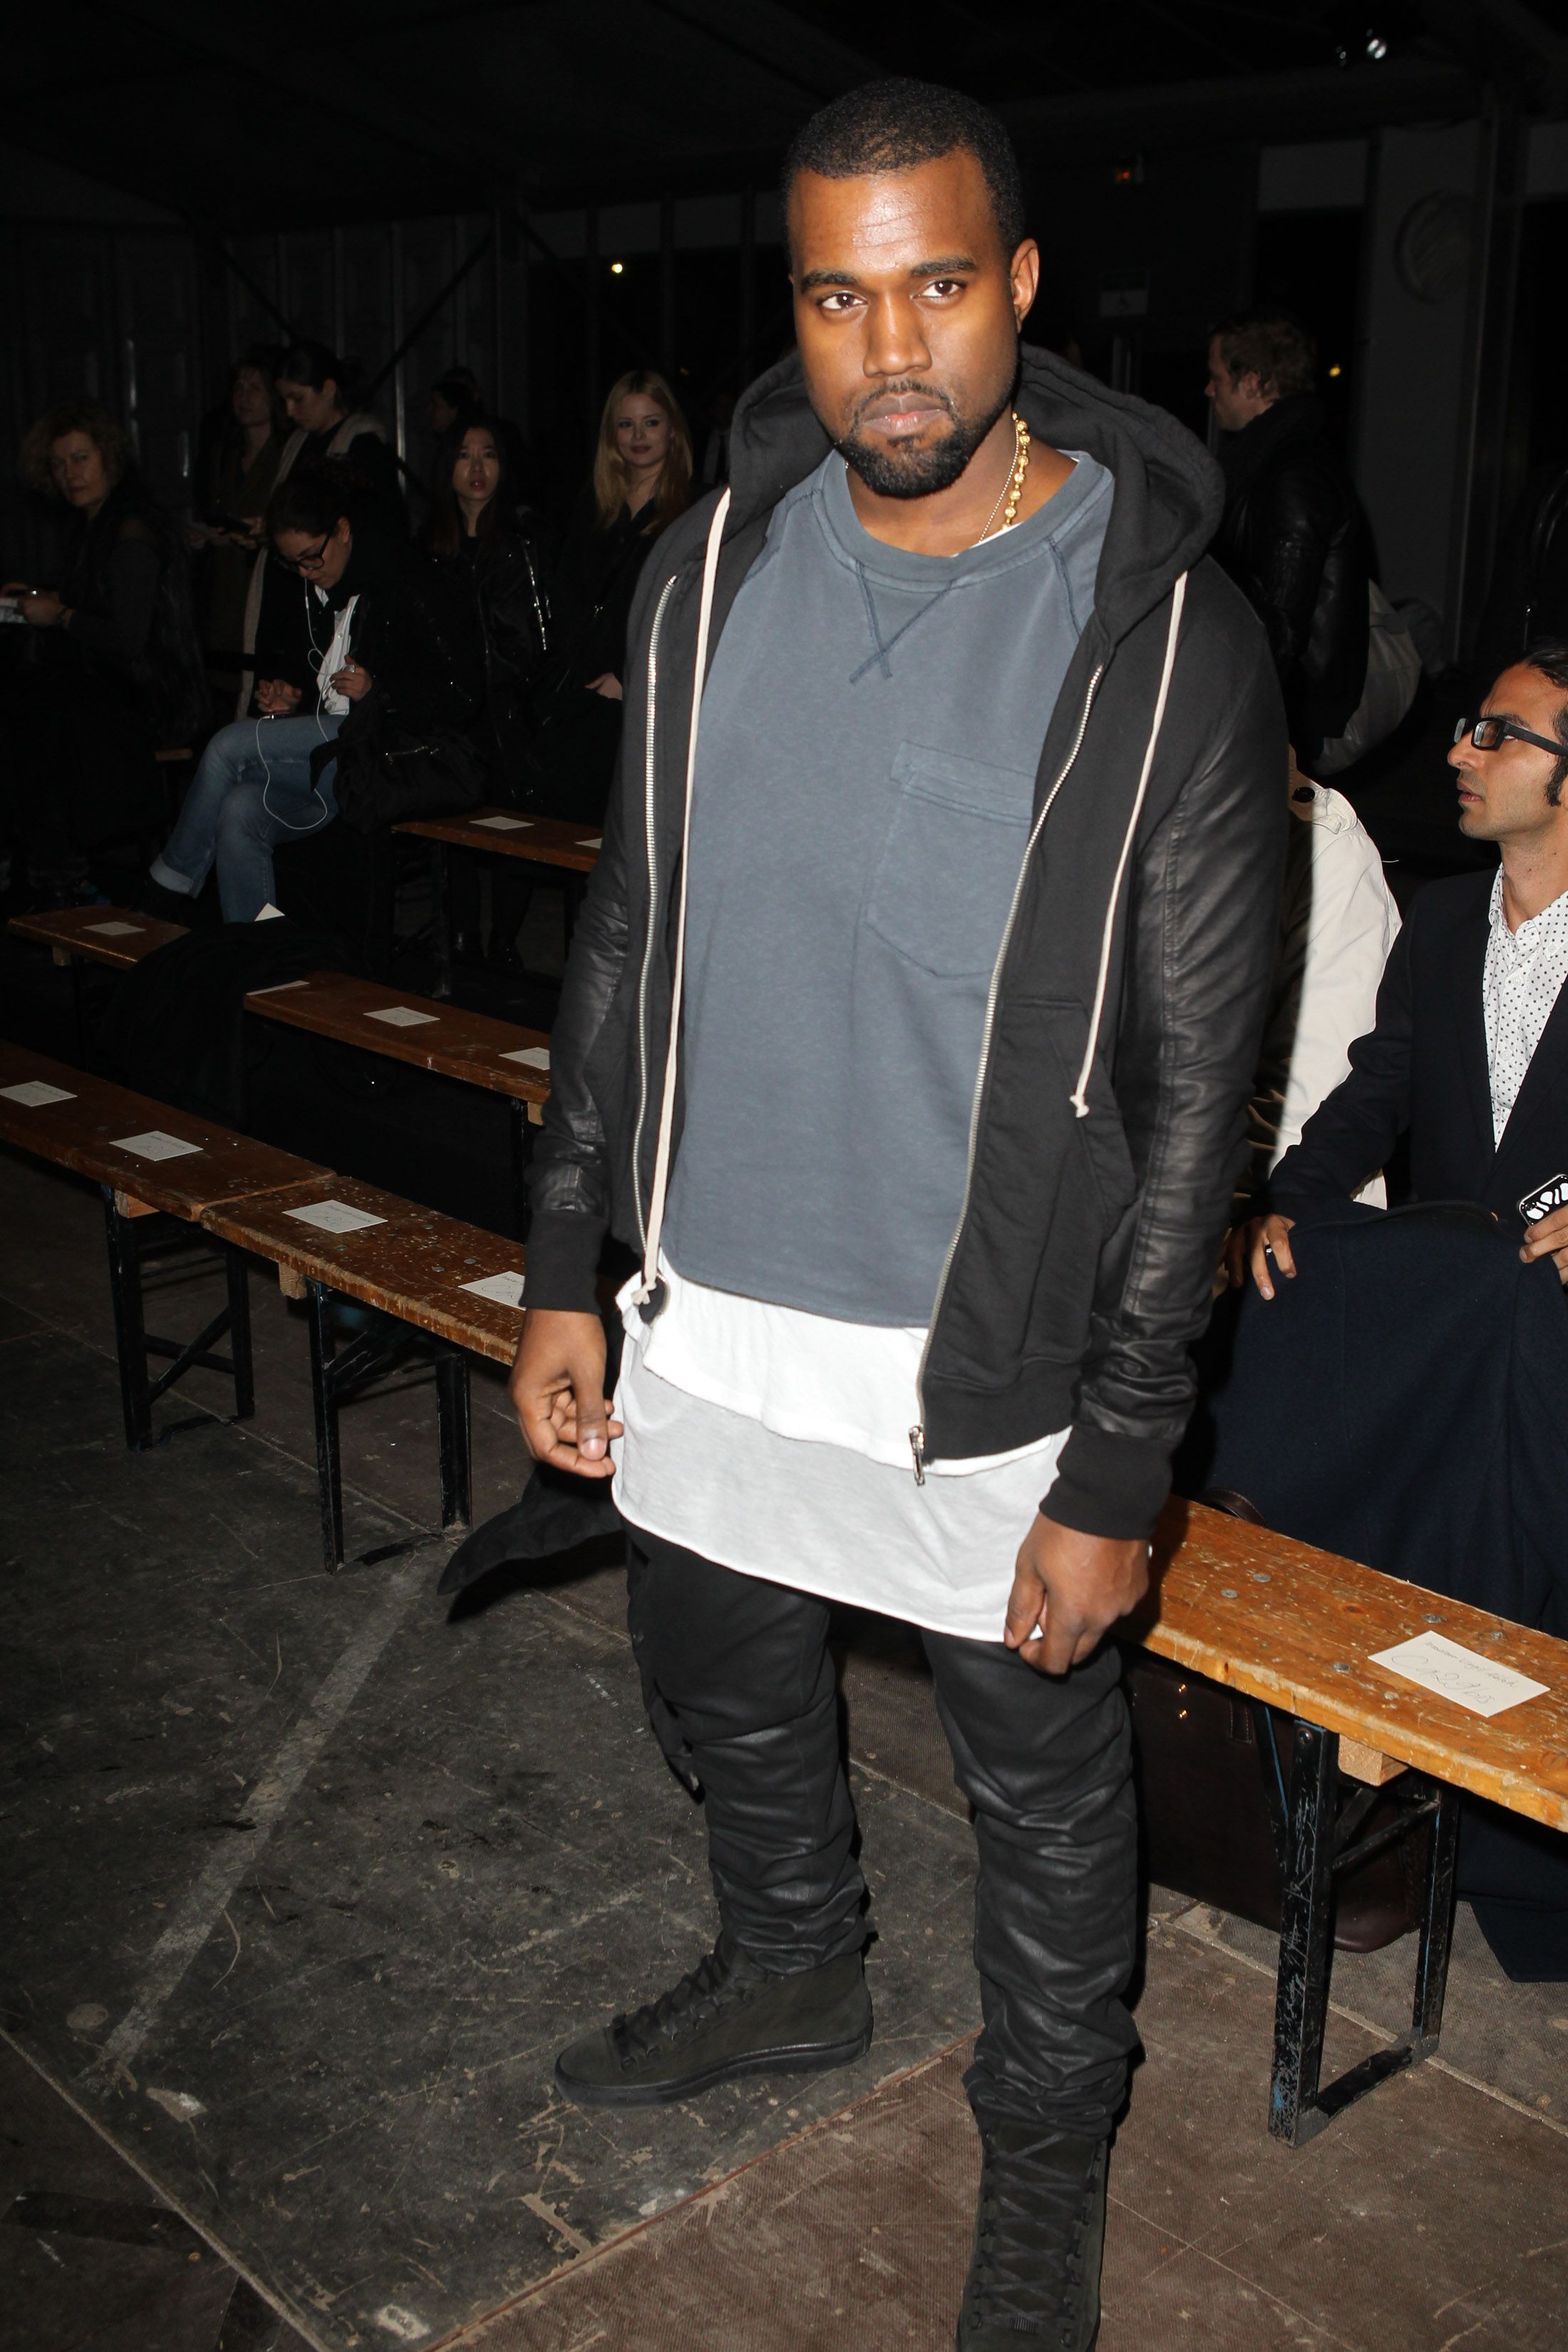 The Best Kanye West Outfits Prove His Outsized Influence on Men's Fashion